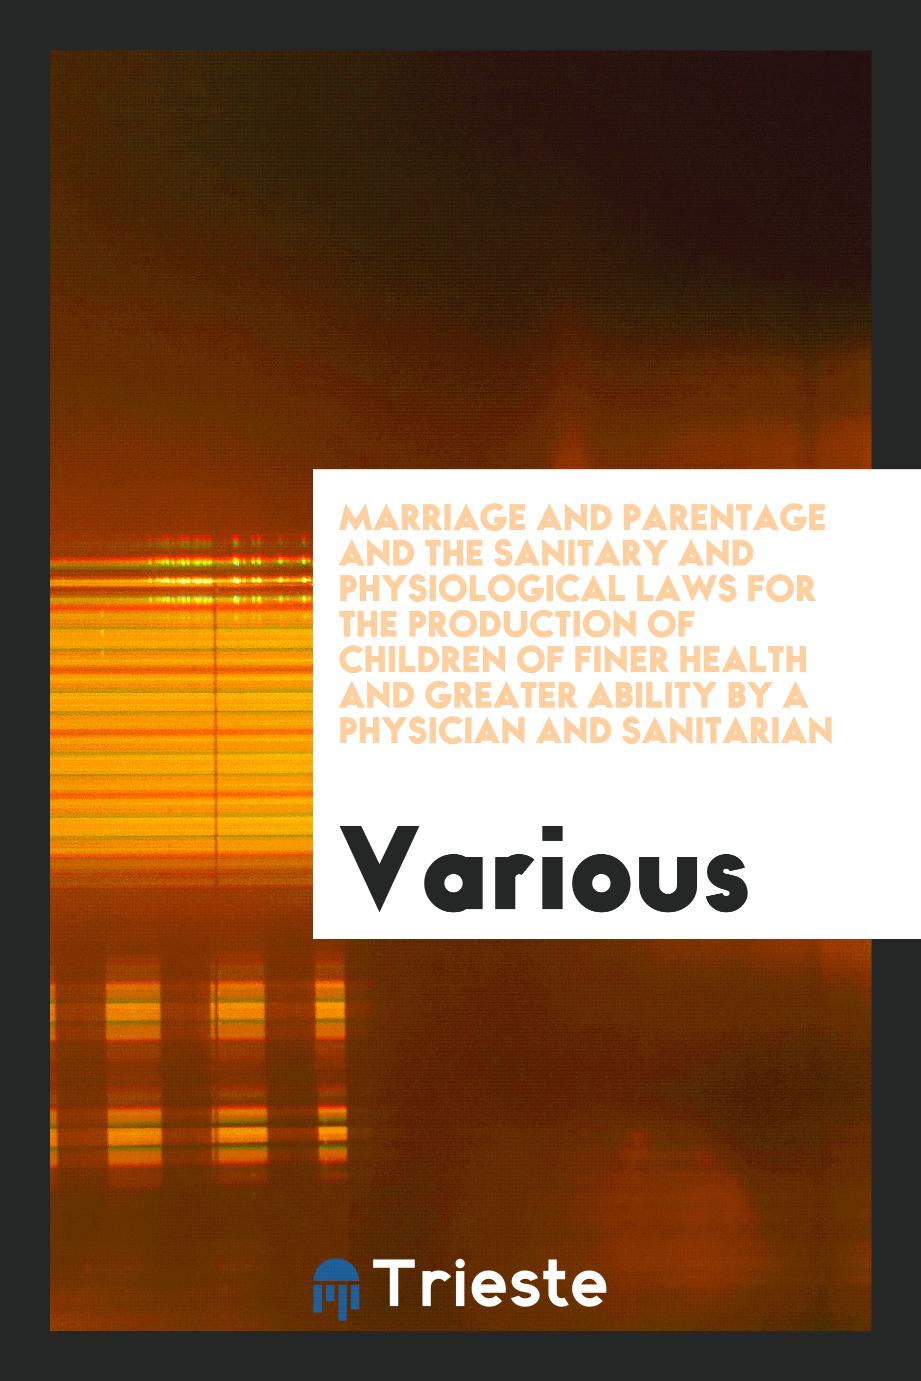 Marriage and Parentage and the Sanitary and Physiological Laws for the Production of Children of Finer Health and Greater Ability by a Physician and Sanitarian